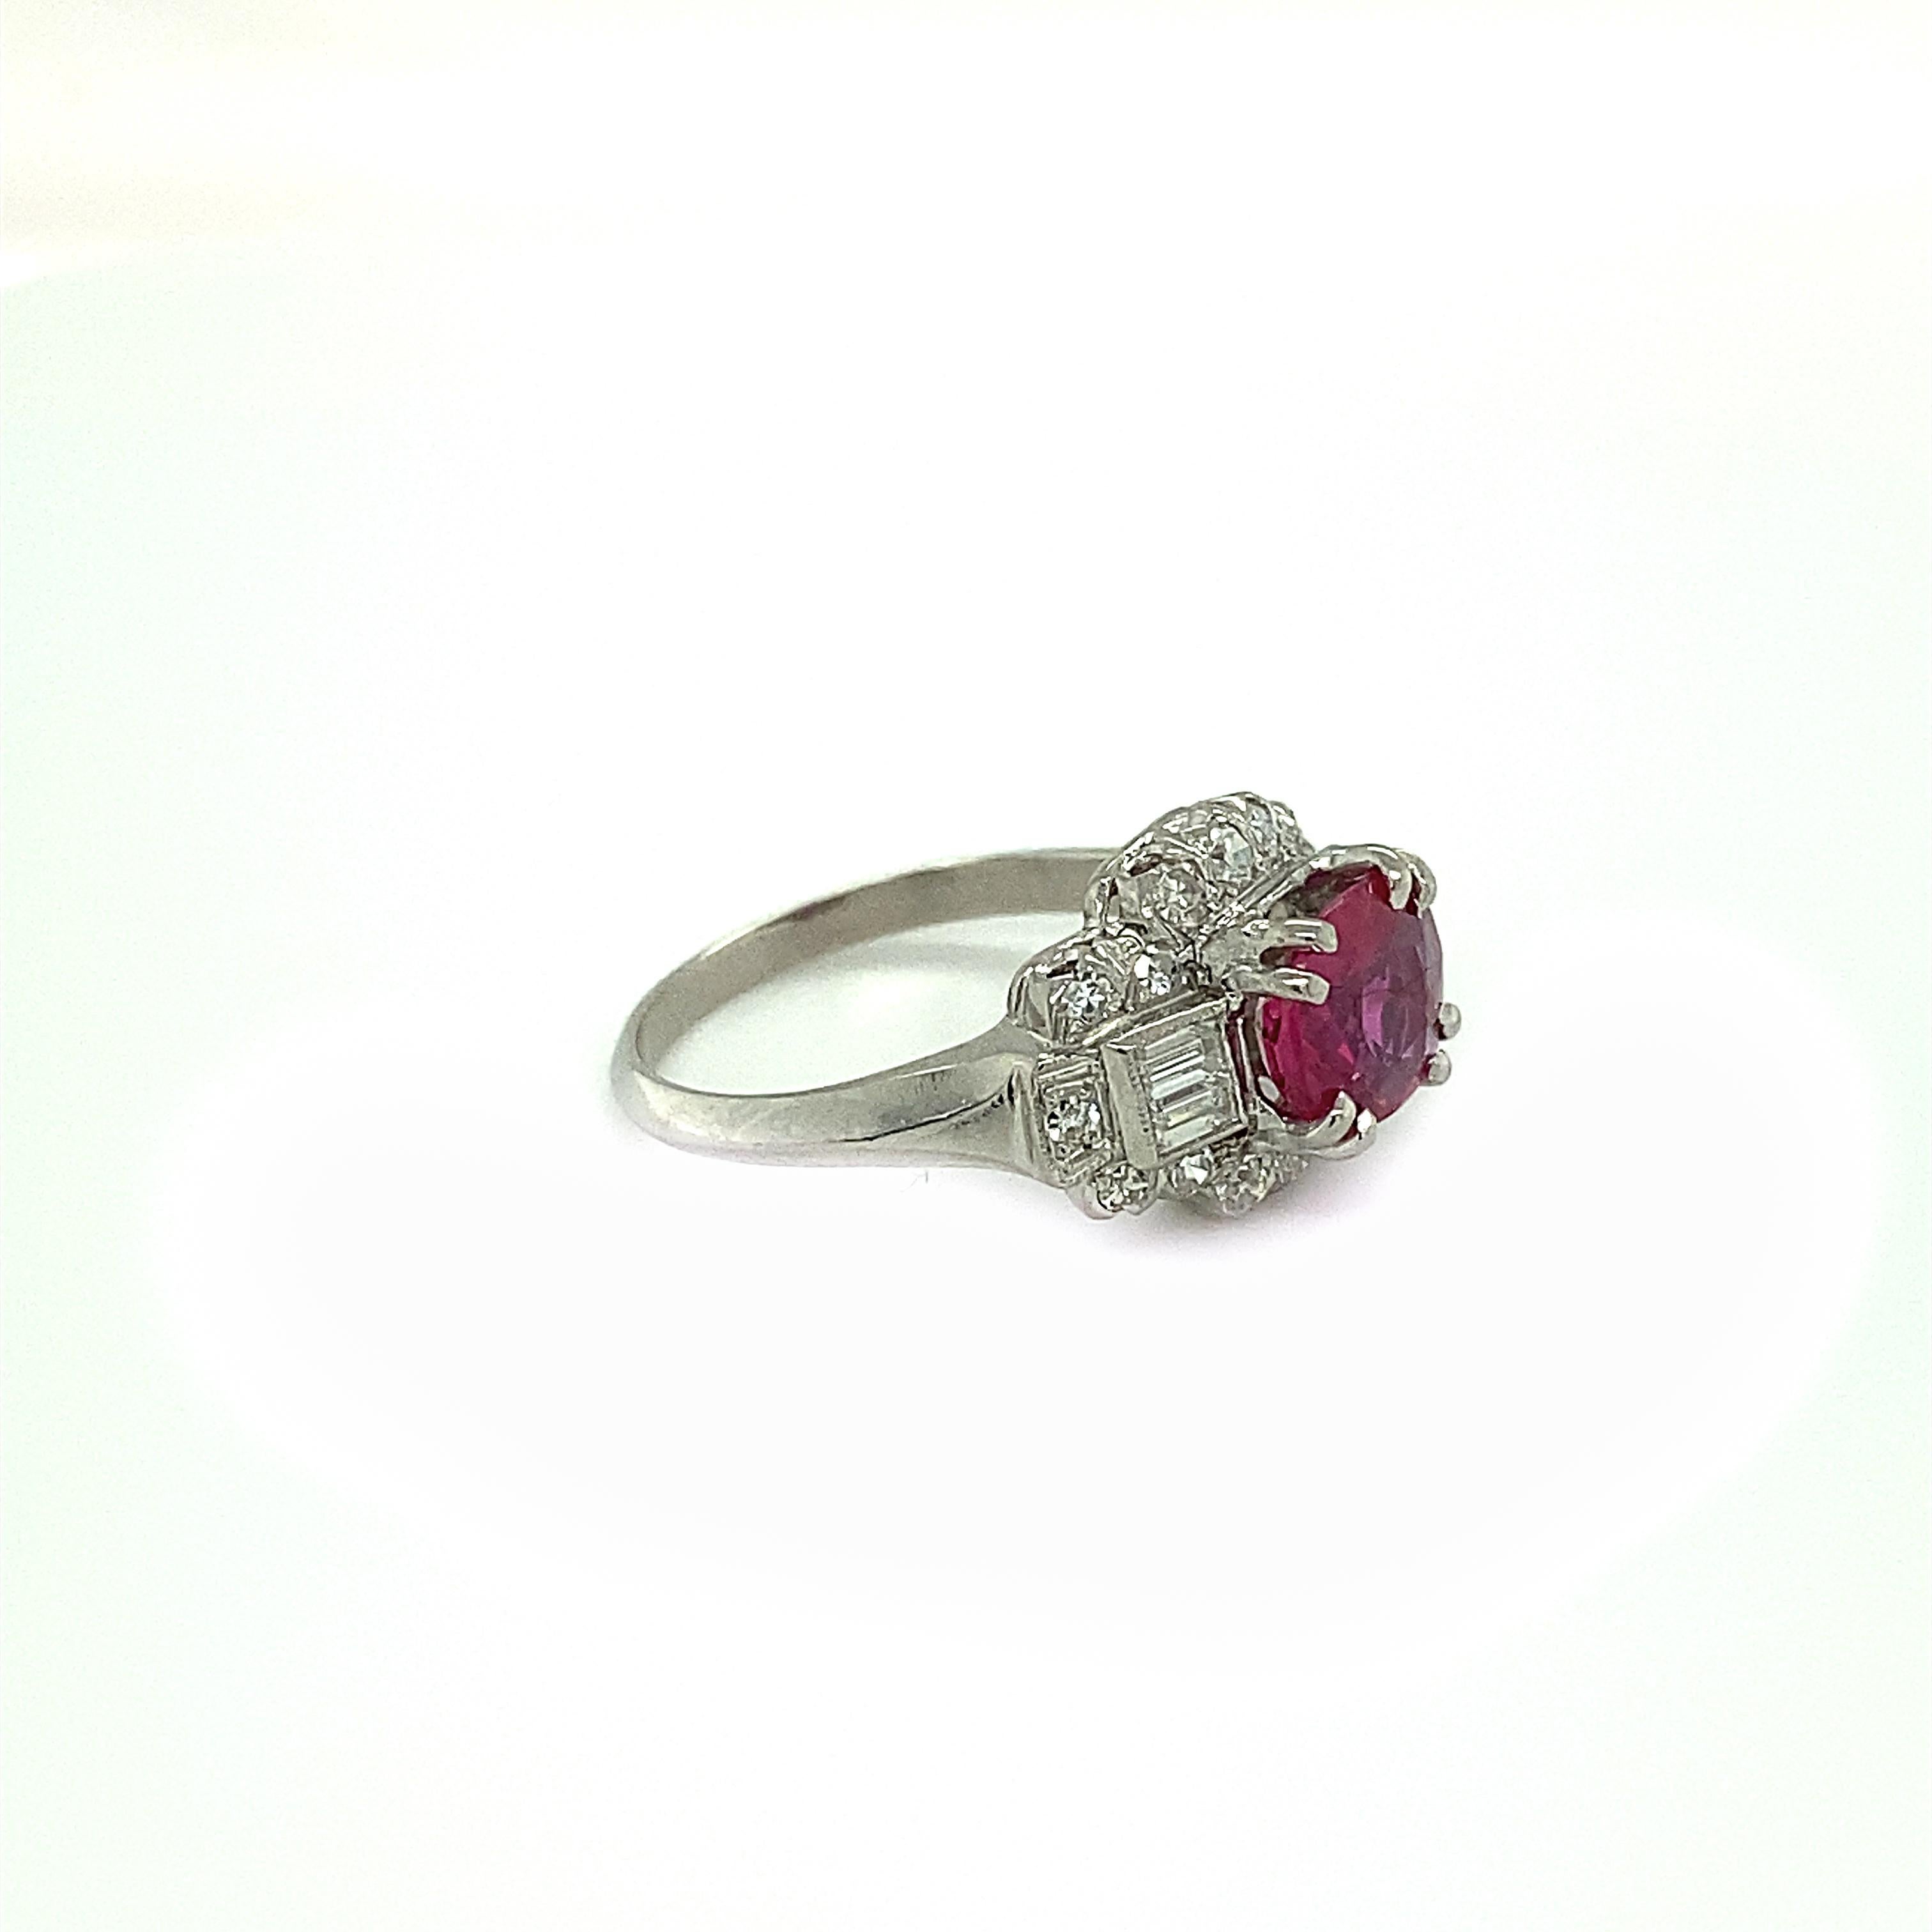 Item Details:
Metal Type: Platinum
Weight: 4 grams
Size: 6 (resizable)

Ruby Details:
Carat: 1.5 Carat Total
Heat Only Treatment

Diamond Details:
Cut: Single Cut and Baguettes
Carat: .4 carat total weight
Color: G
Clarity: VS

Top of Finger to Top